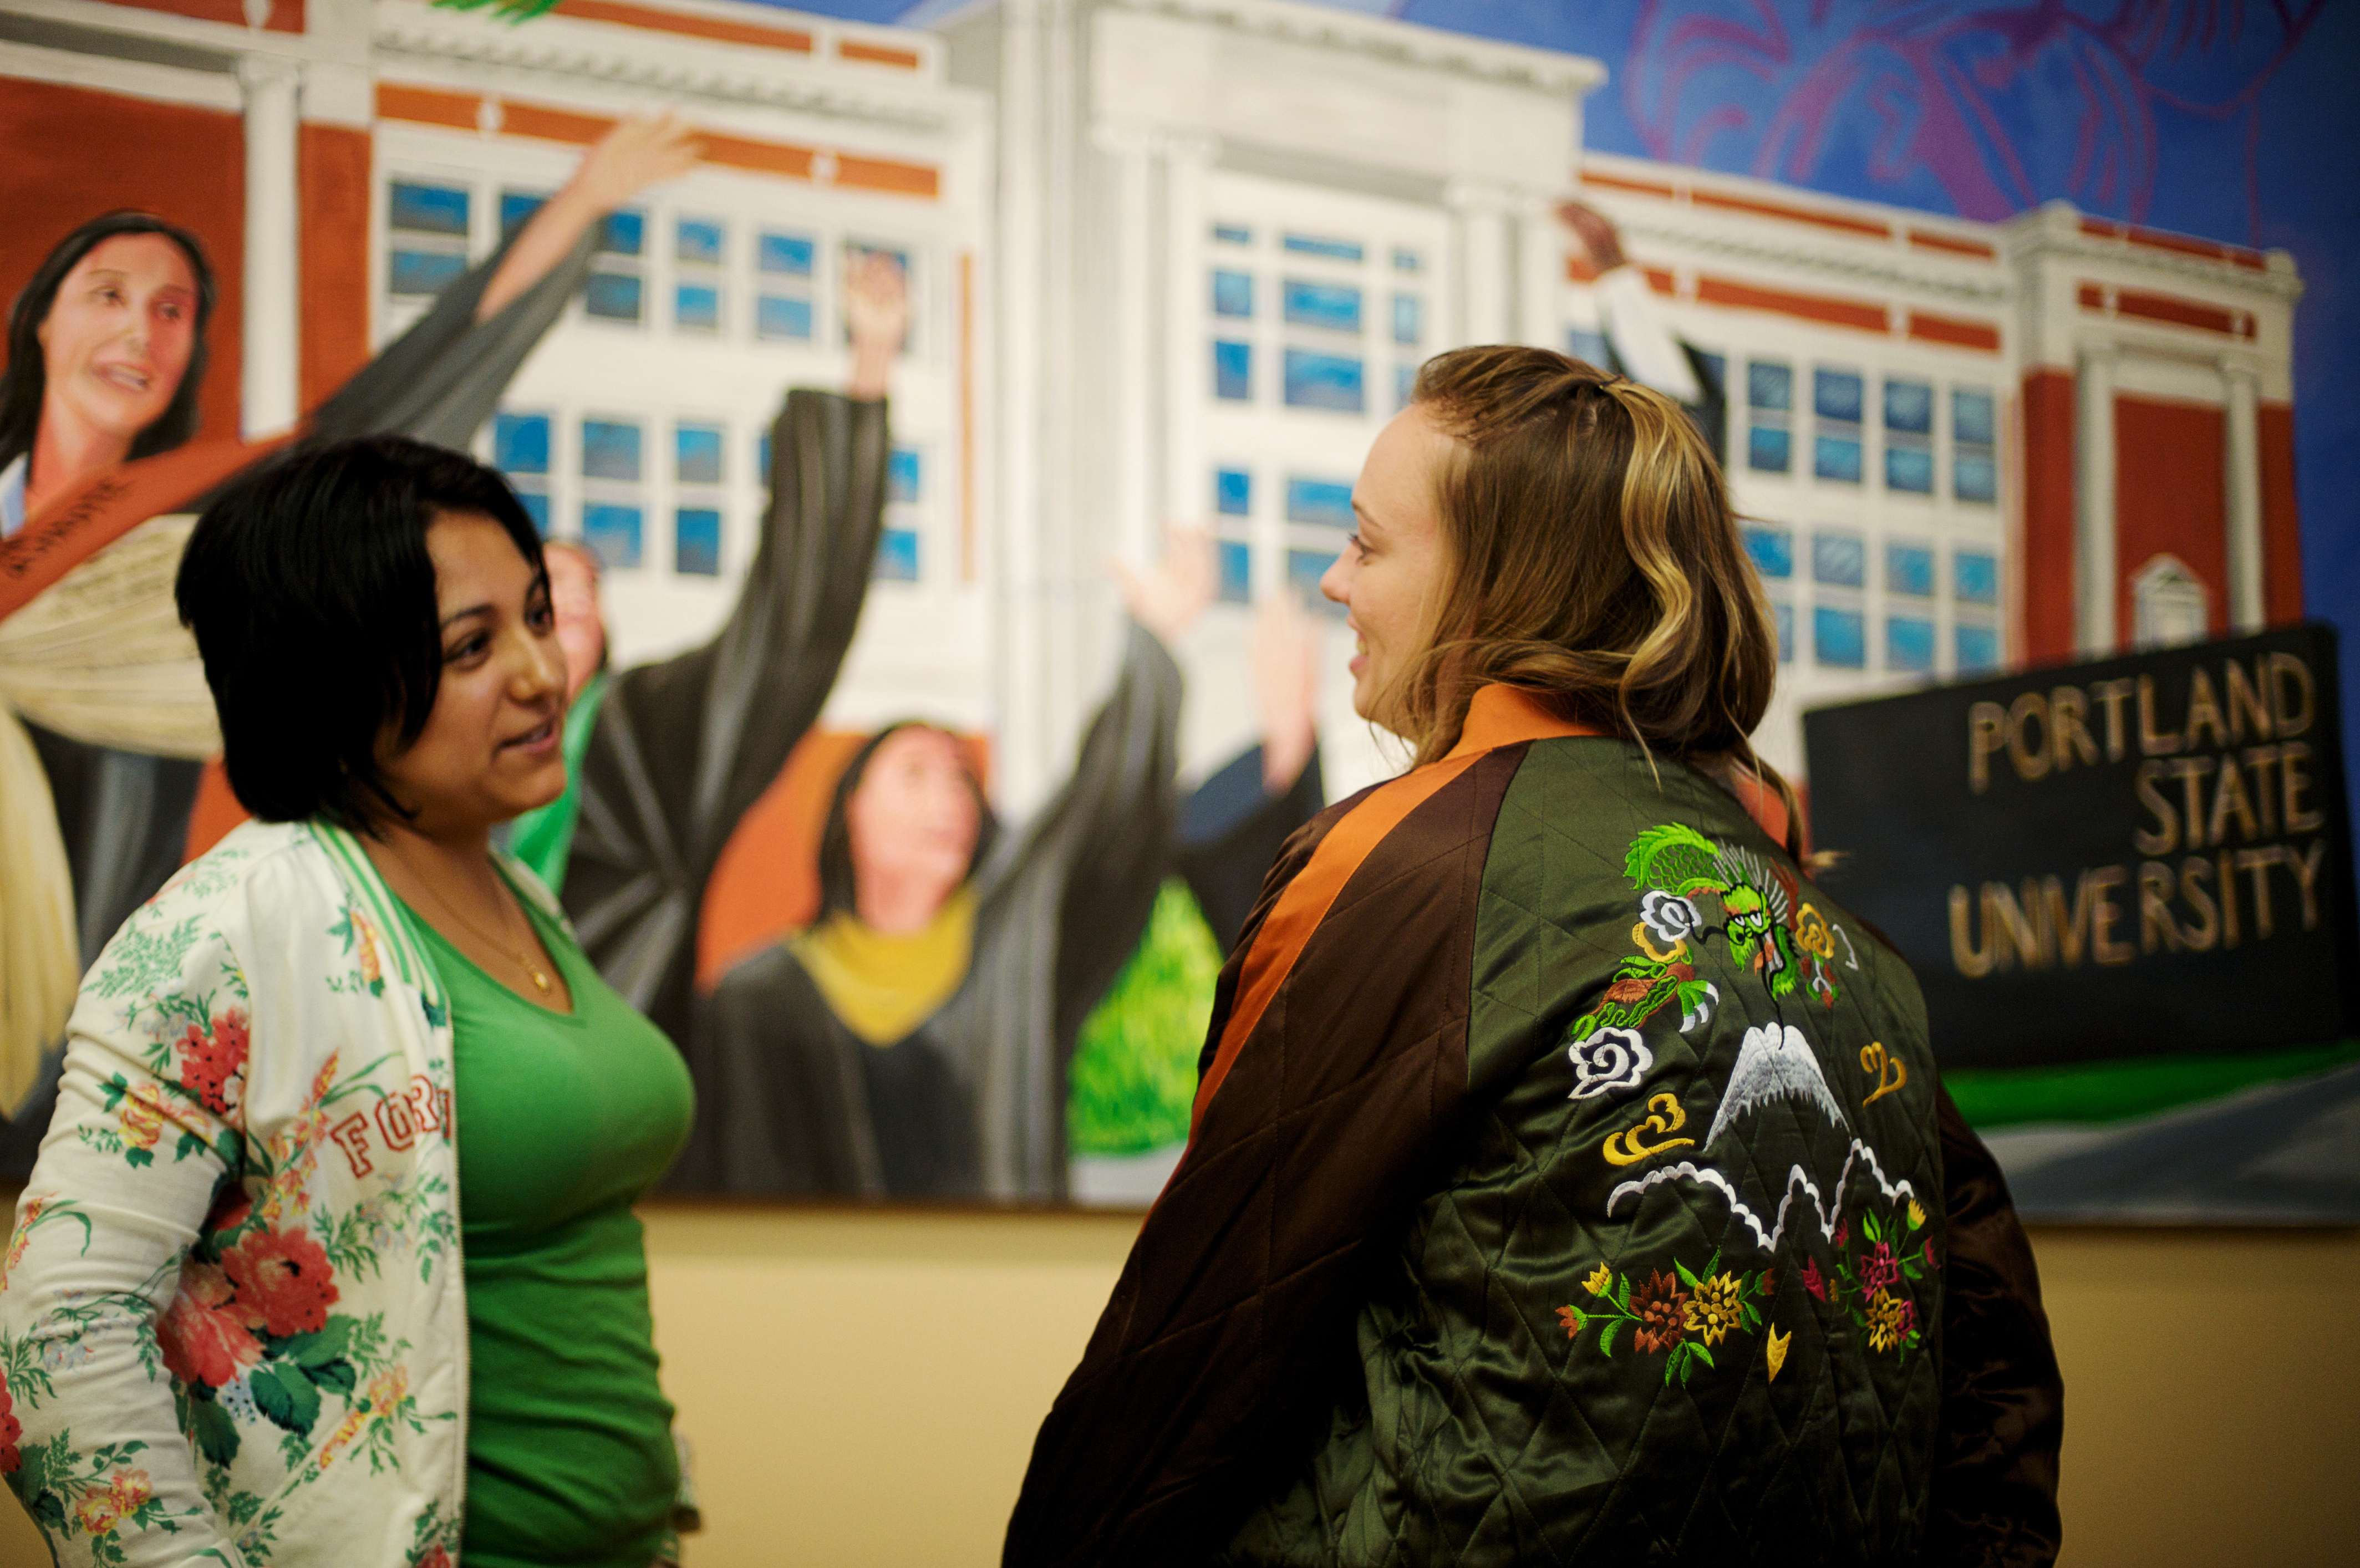 Two students standing and having a conversation in front of a mural depicting PSU graduates in caps and gowns.